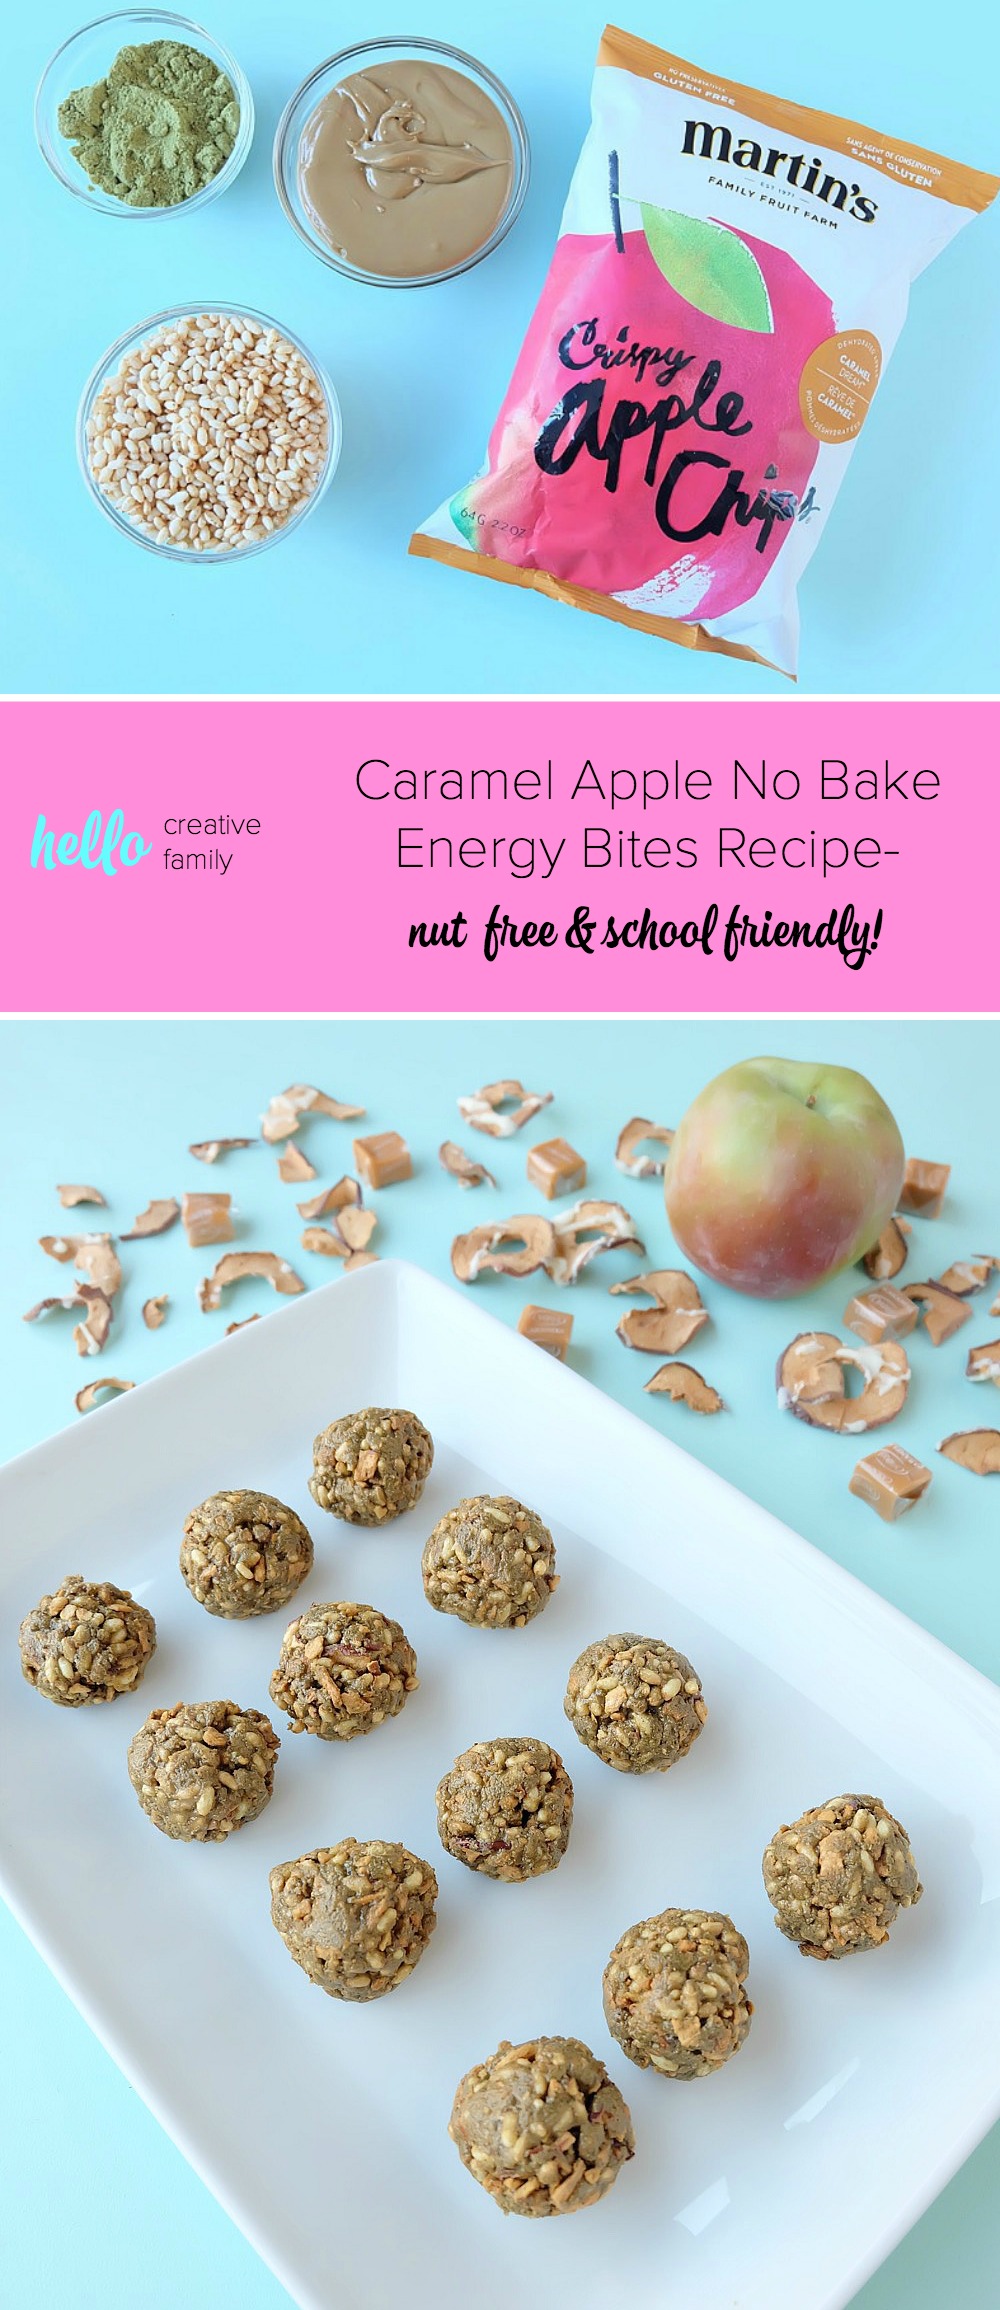 This caramel apple no bake energy bites recipe is delicious, nutritious and perfect for school lunches. It is nut free and easy to make in less than 5 minutes. Packed with protein these bliss balls are a family friendly snack idea. #Recipe #Apples #AppleRecipe #Sponsored